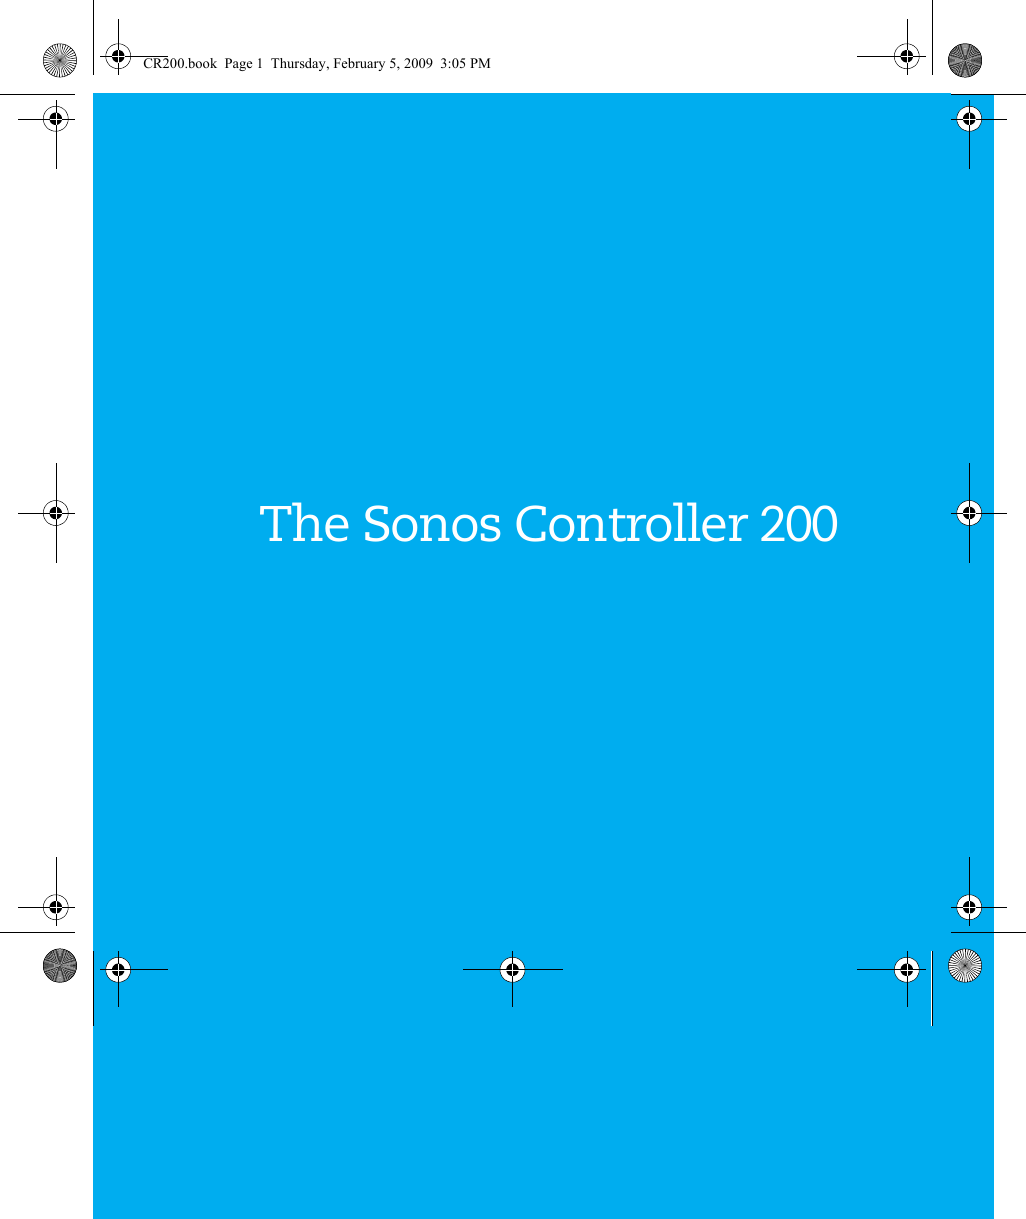 The Sonos Controller 200CR200.book  Page 1  Thursday, February 5, 2009  3:05 PM